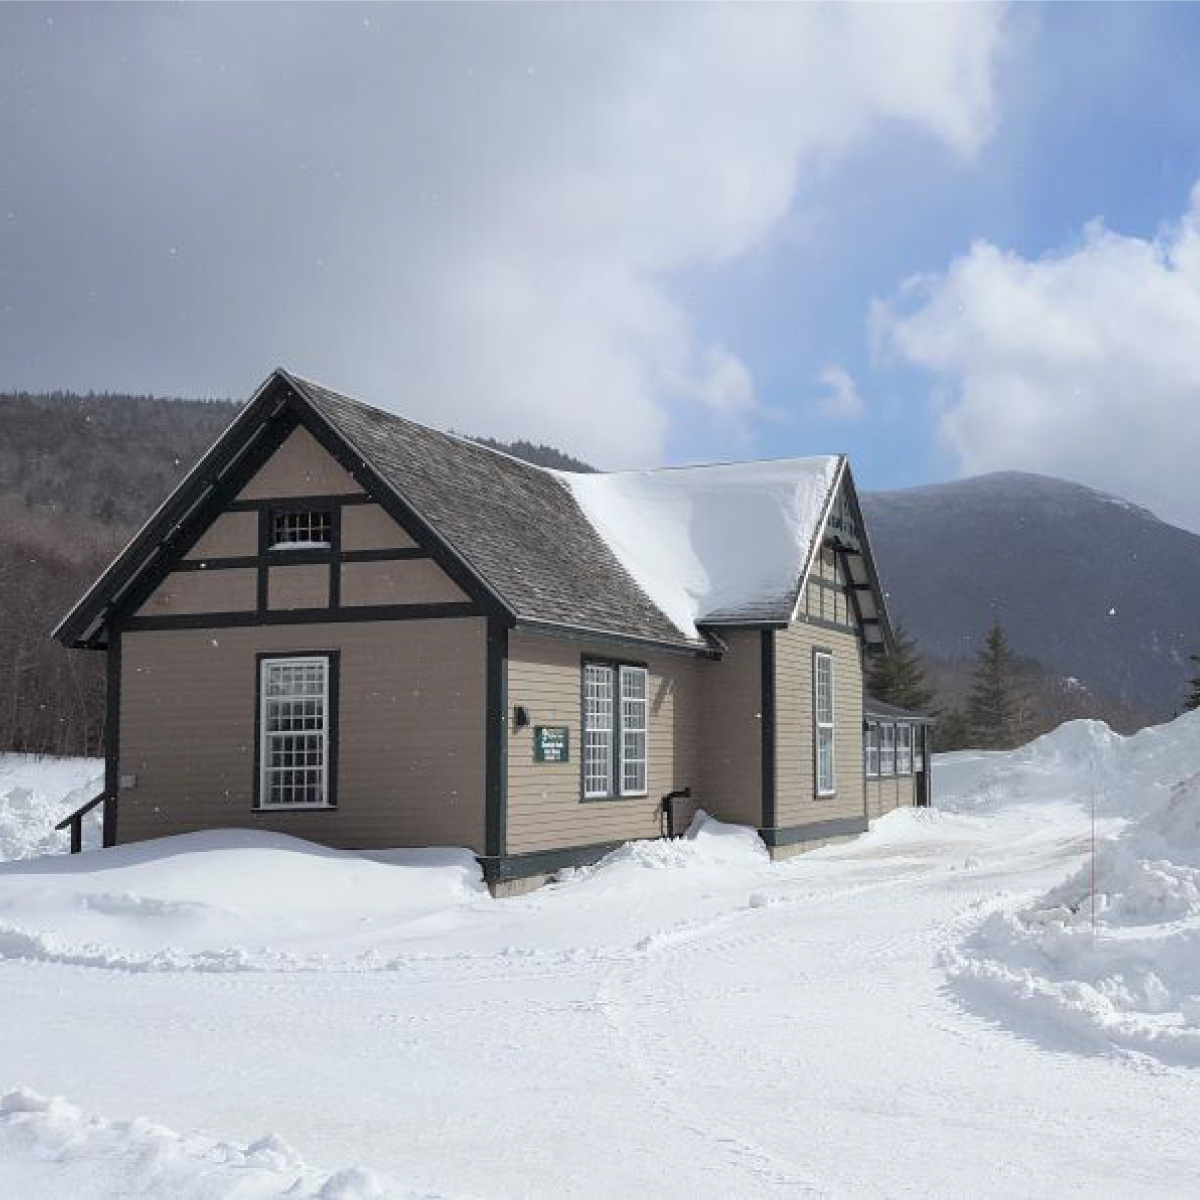 View of Shapleigh Bunkhouse in winter